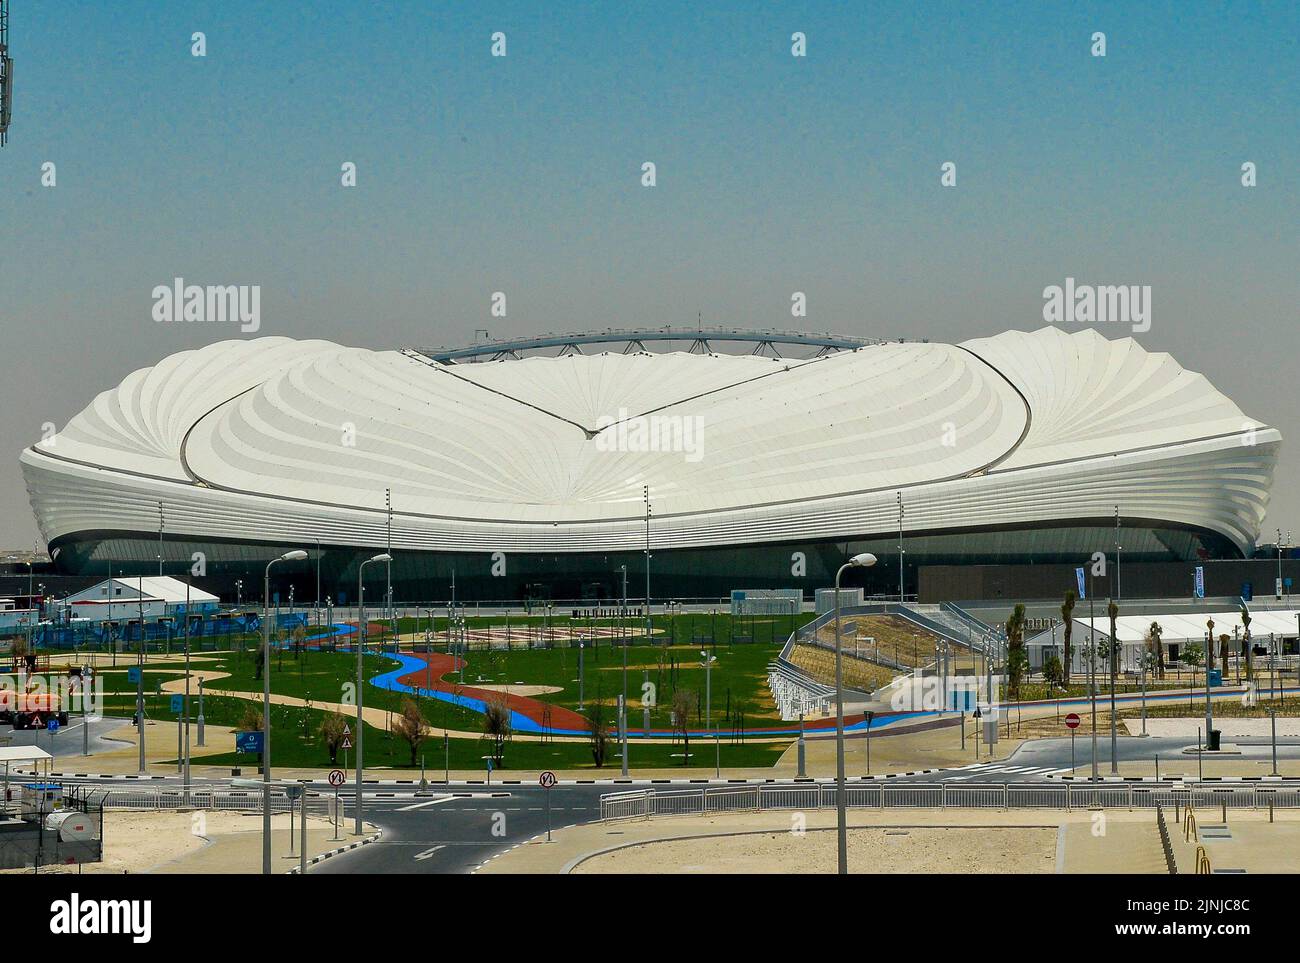 Doha. 16th May, 2019. Photo taken on May 16, 2019 shows the exterior view of Al Janoub Stadium which will host the 2022 FIFA World Cup matches in Doha, Qatar. Credit: Nikku/Xinhua/Alamy Live News Stock Photo